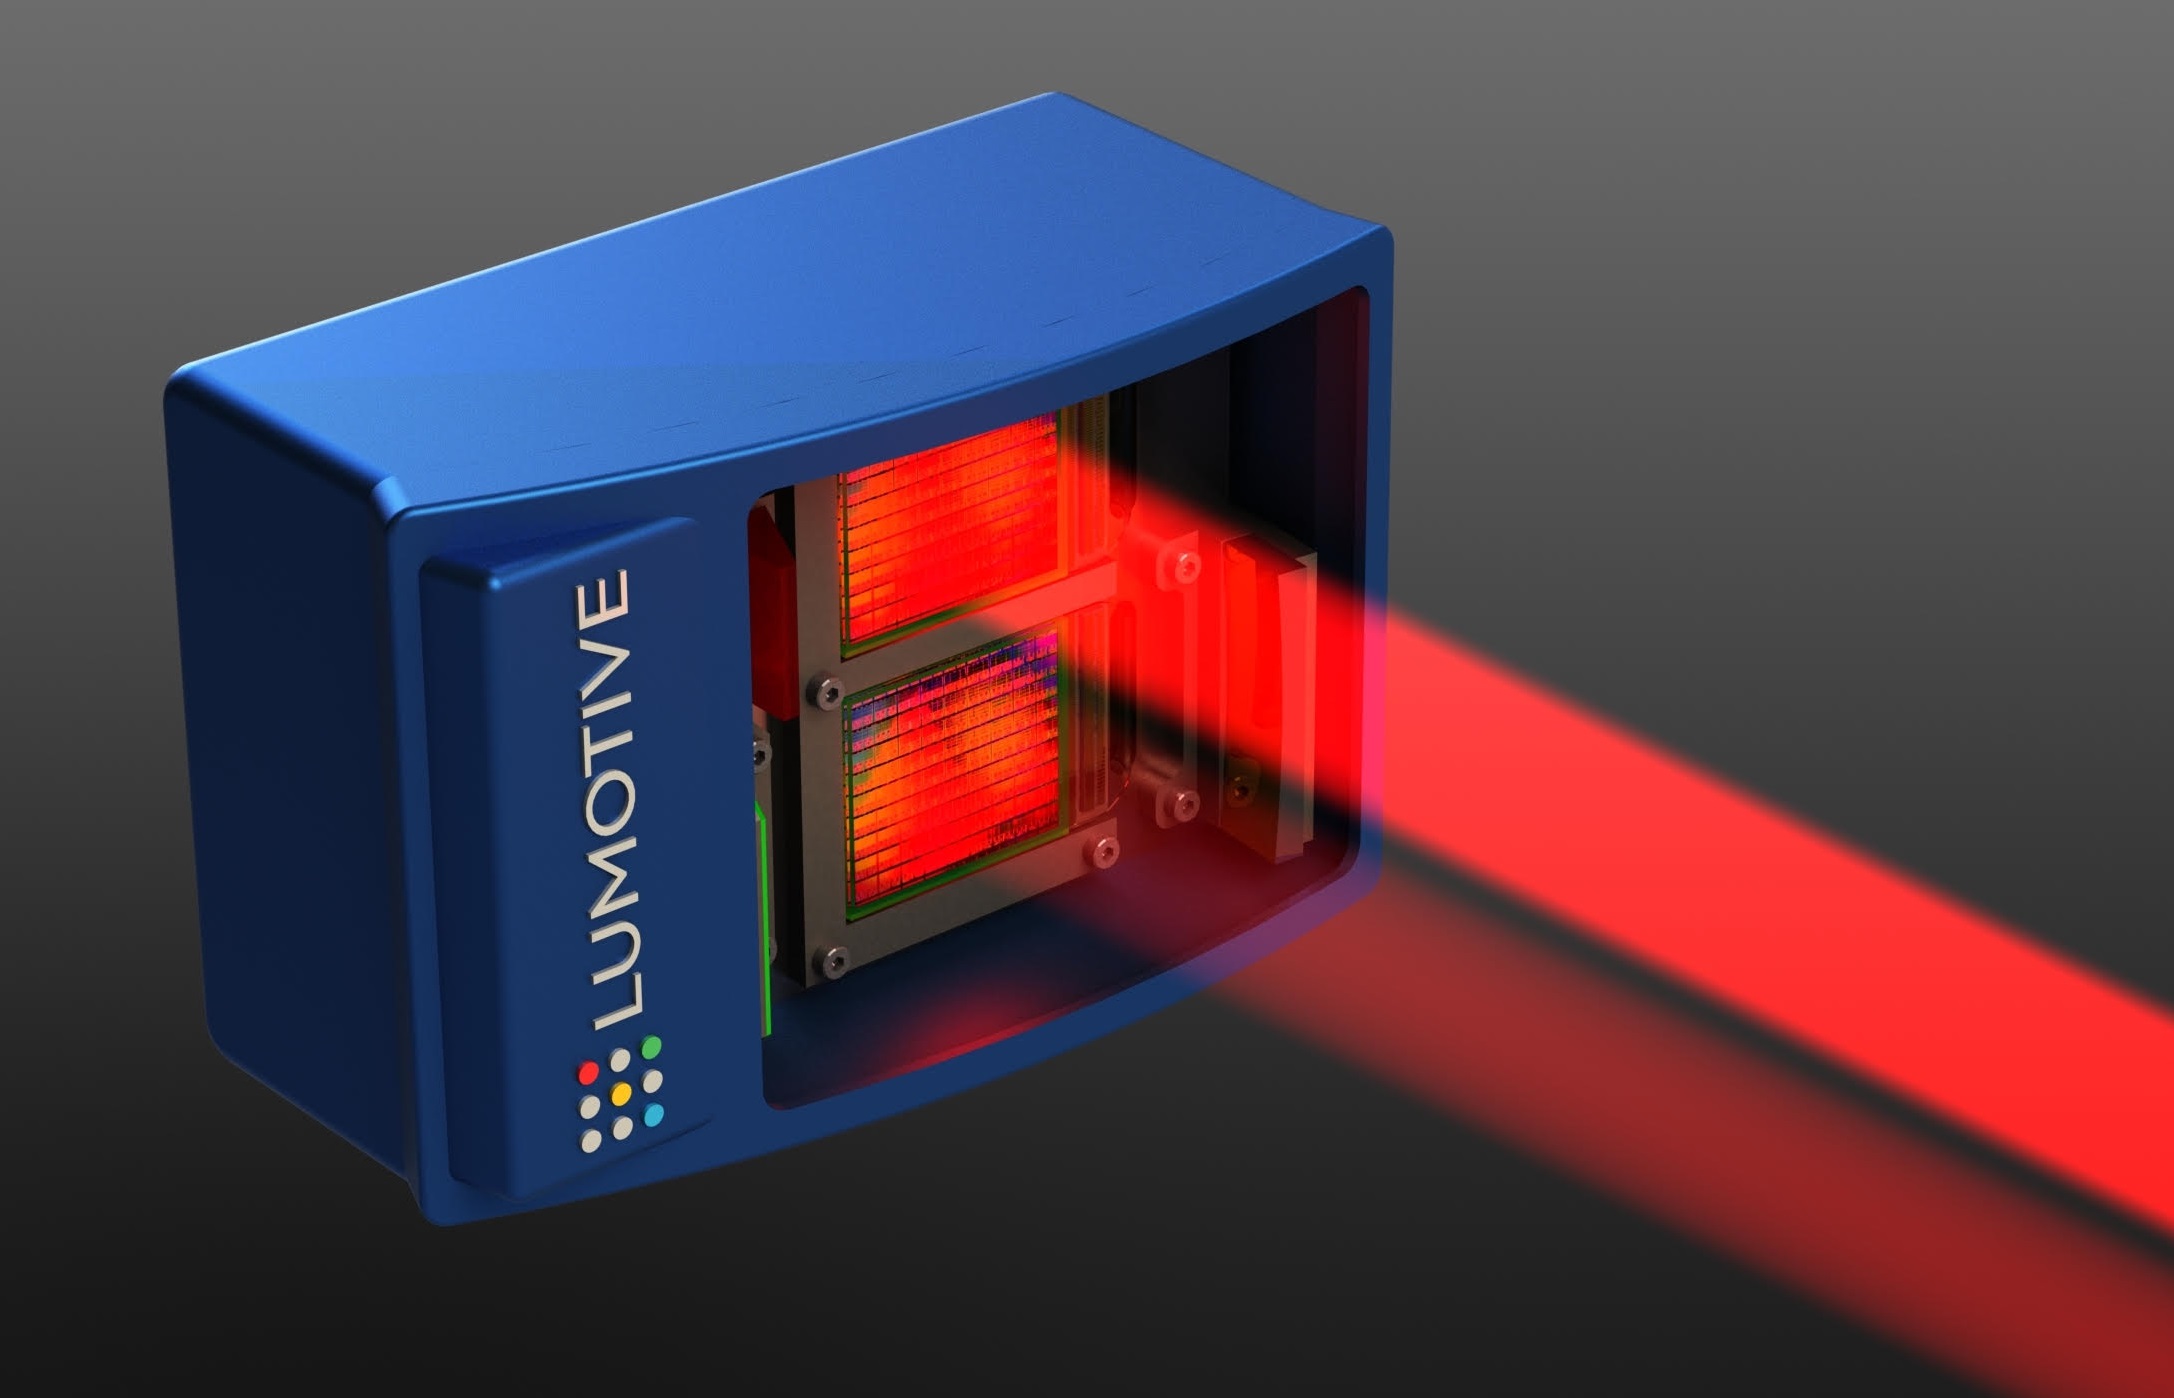 Gates-backed Lumotive upends lidar conventions using metamaterials | TechCrunch